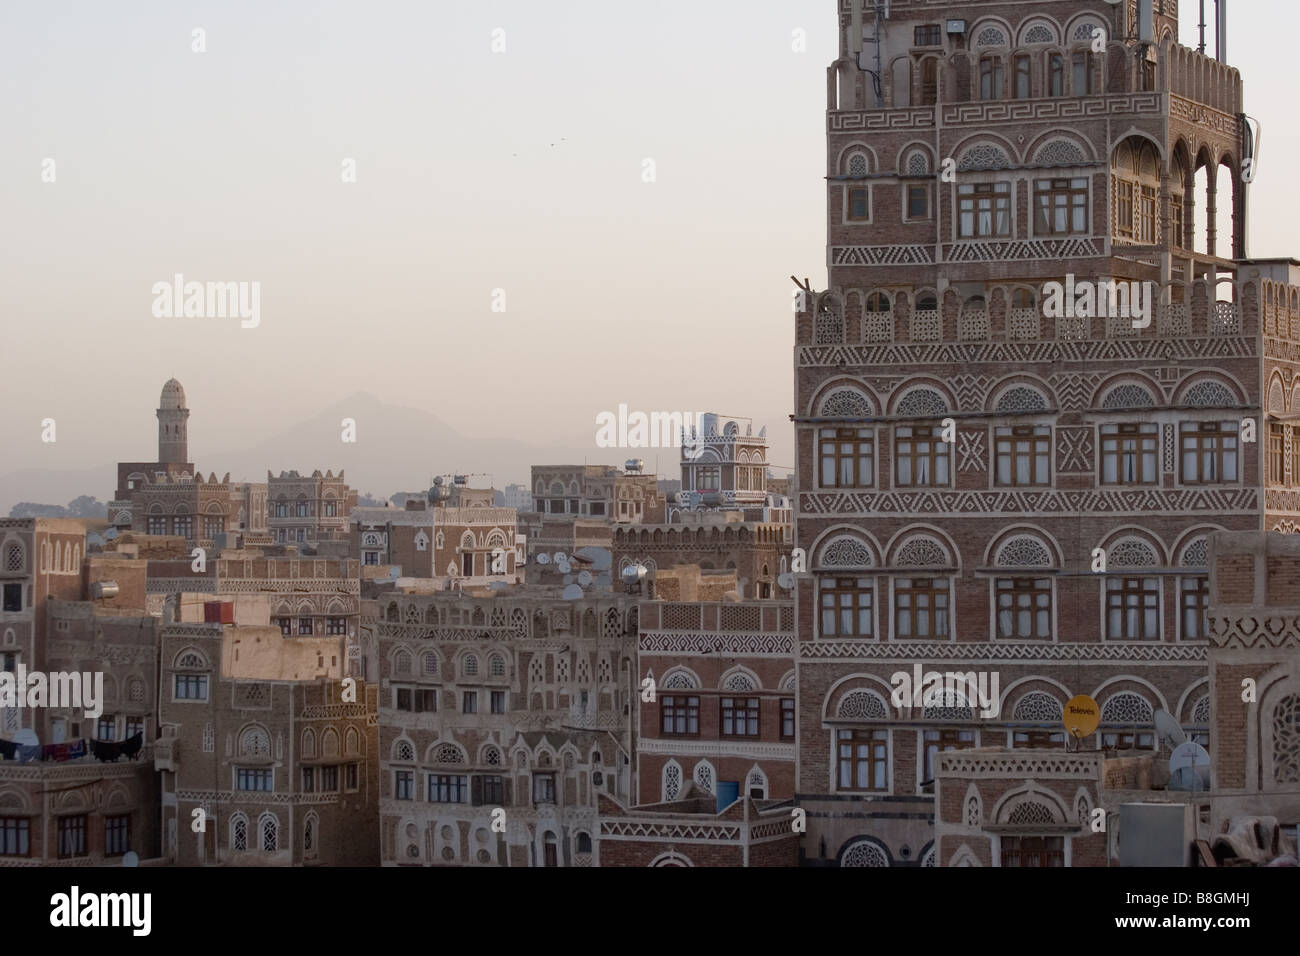 view over multi-story mud houses in sana'a yemen Stock Photo